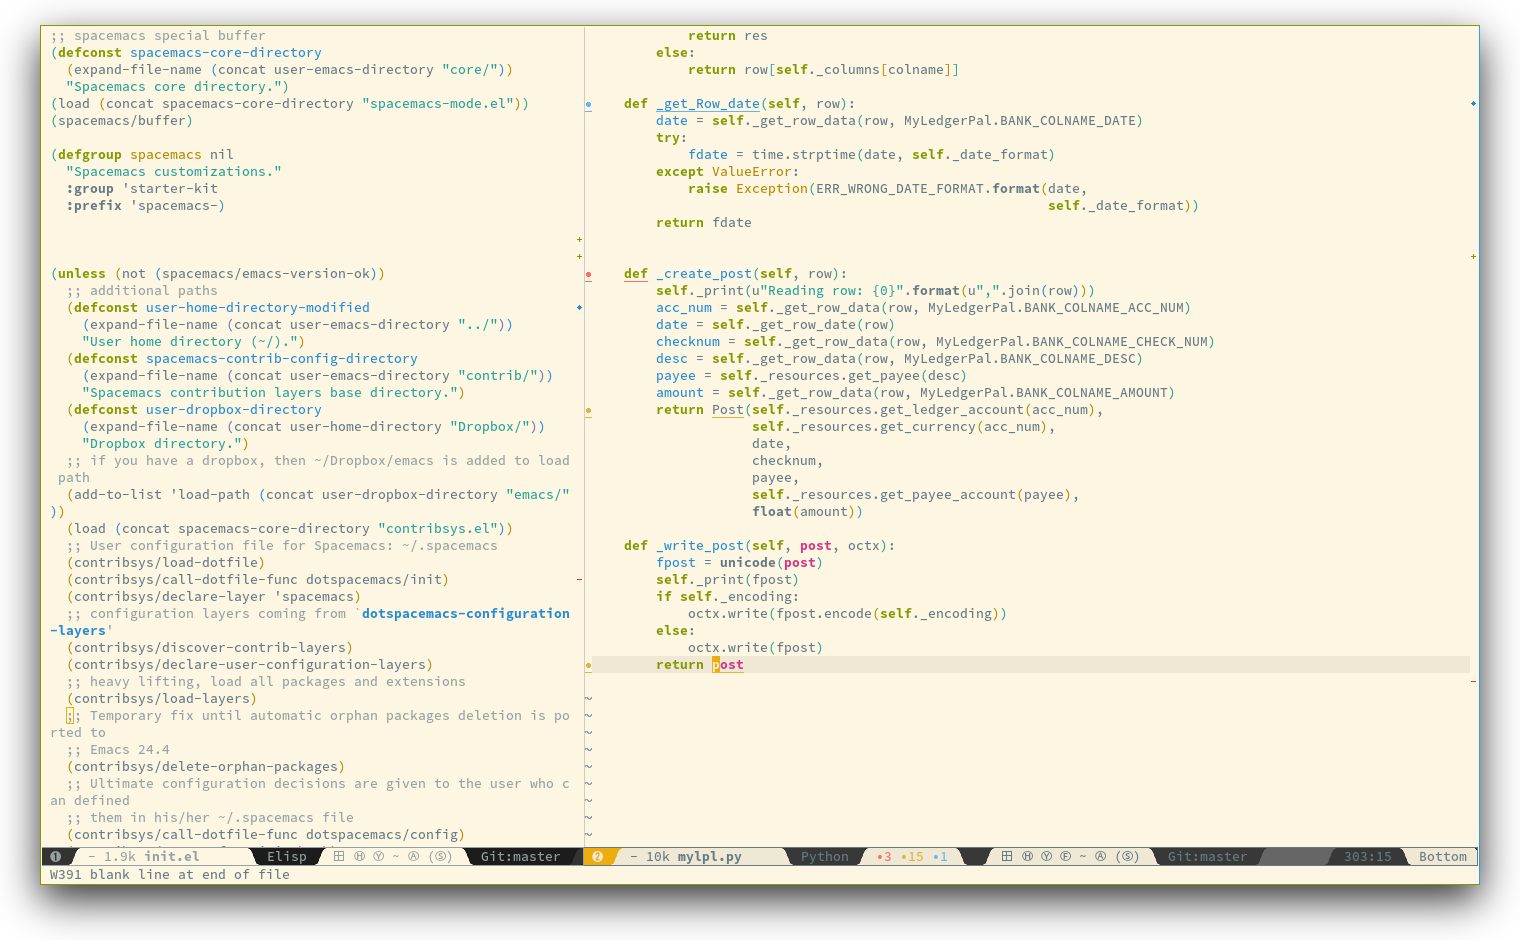 /TakeV/spacemacs/media/commit/3de3133ed0526f239714774834668cac1fba2629/doc/img/spacemacs-python.png